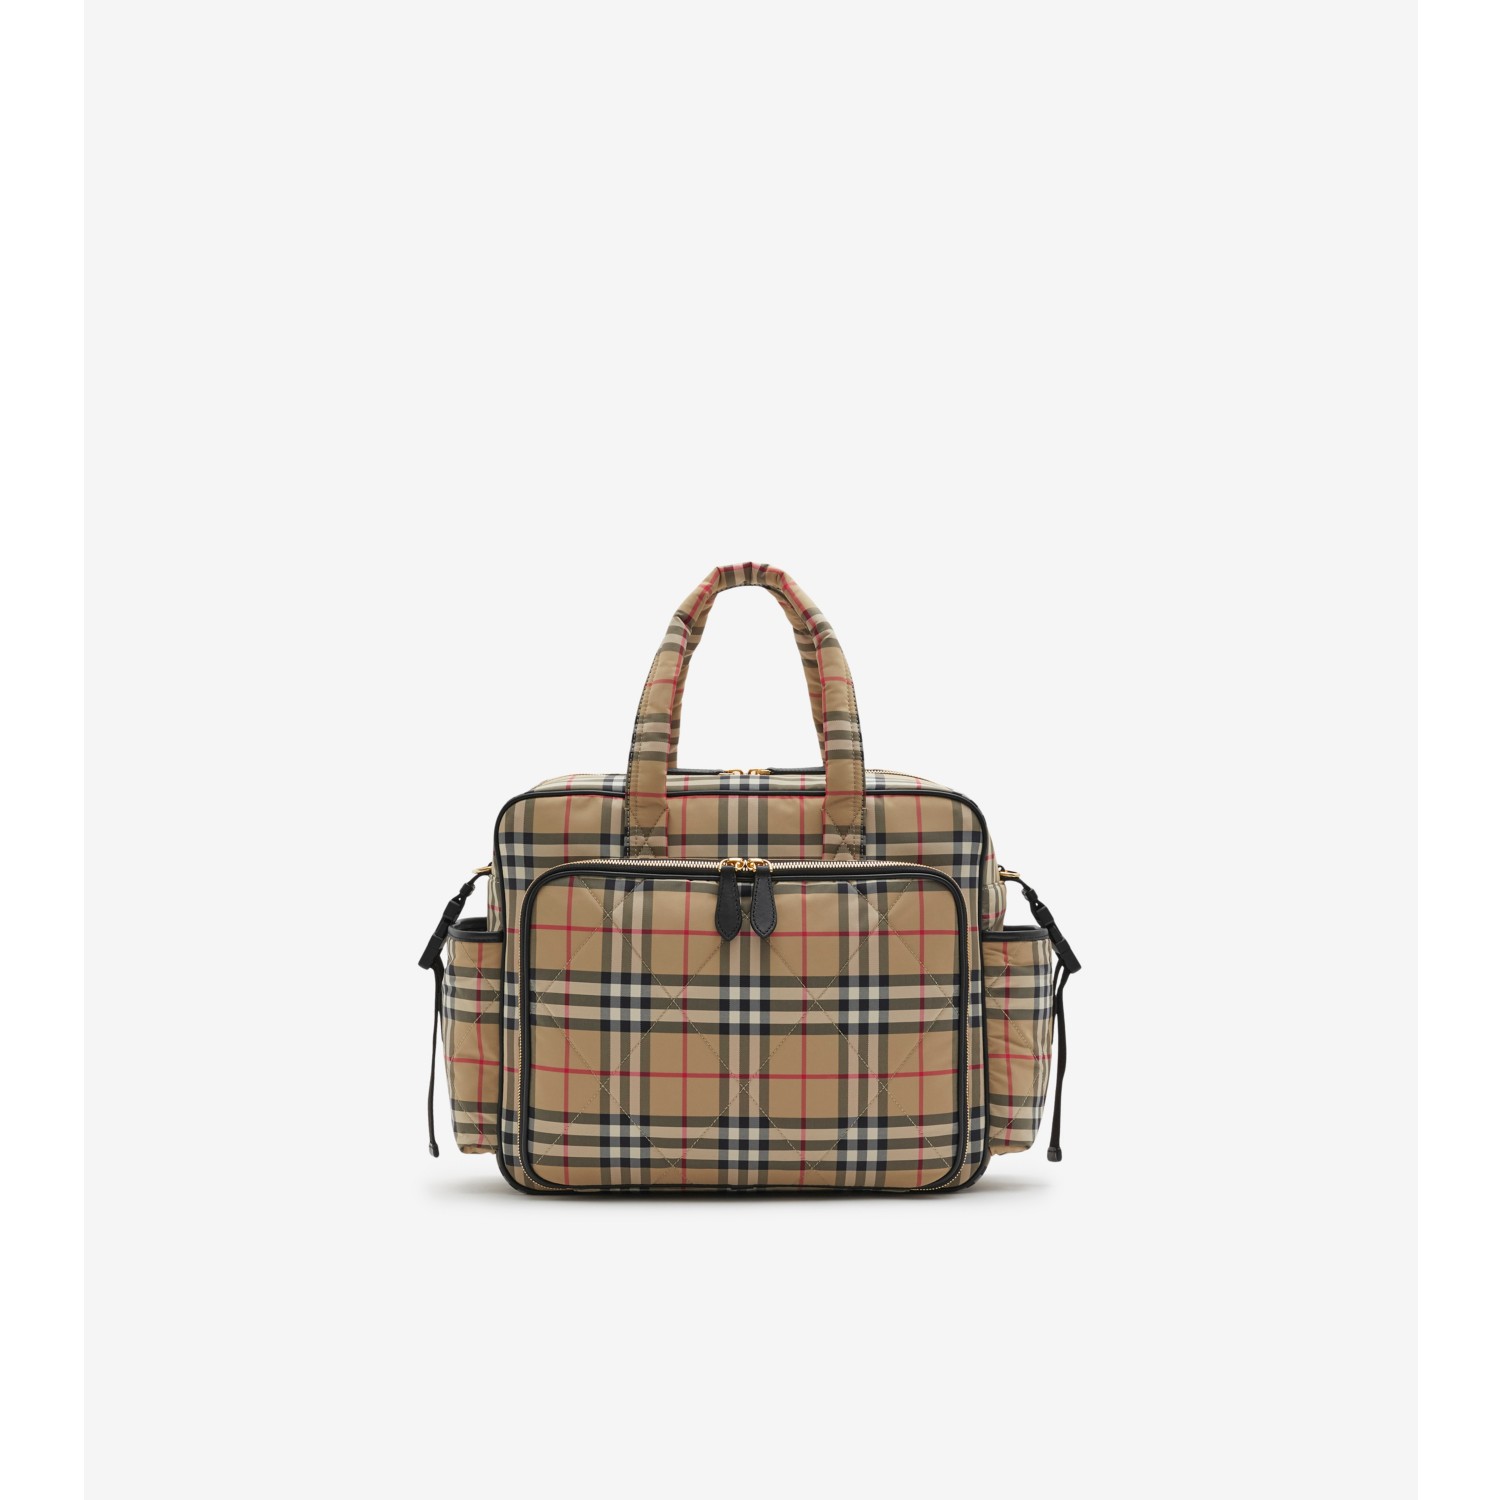 Burberry Vintage Check & Leather Diaper Bag w/ Changing Pad